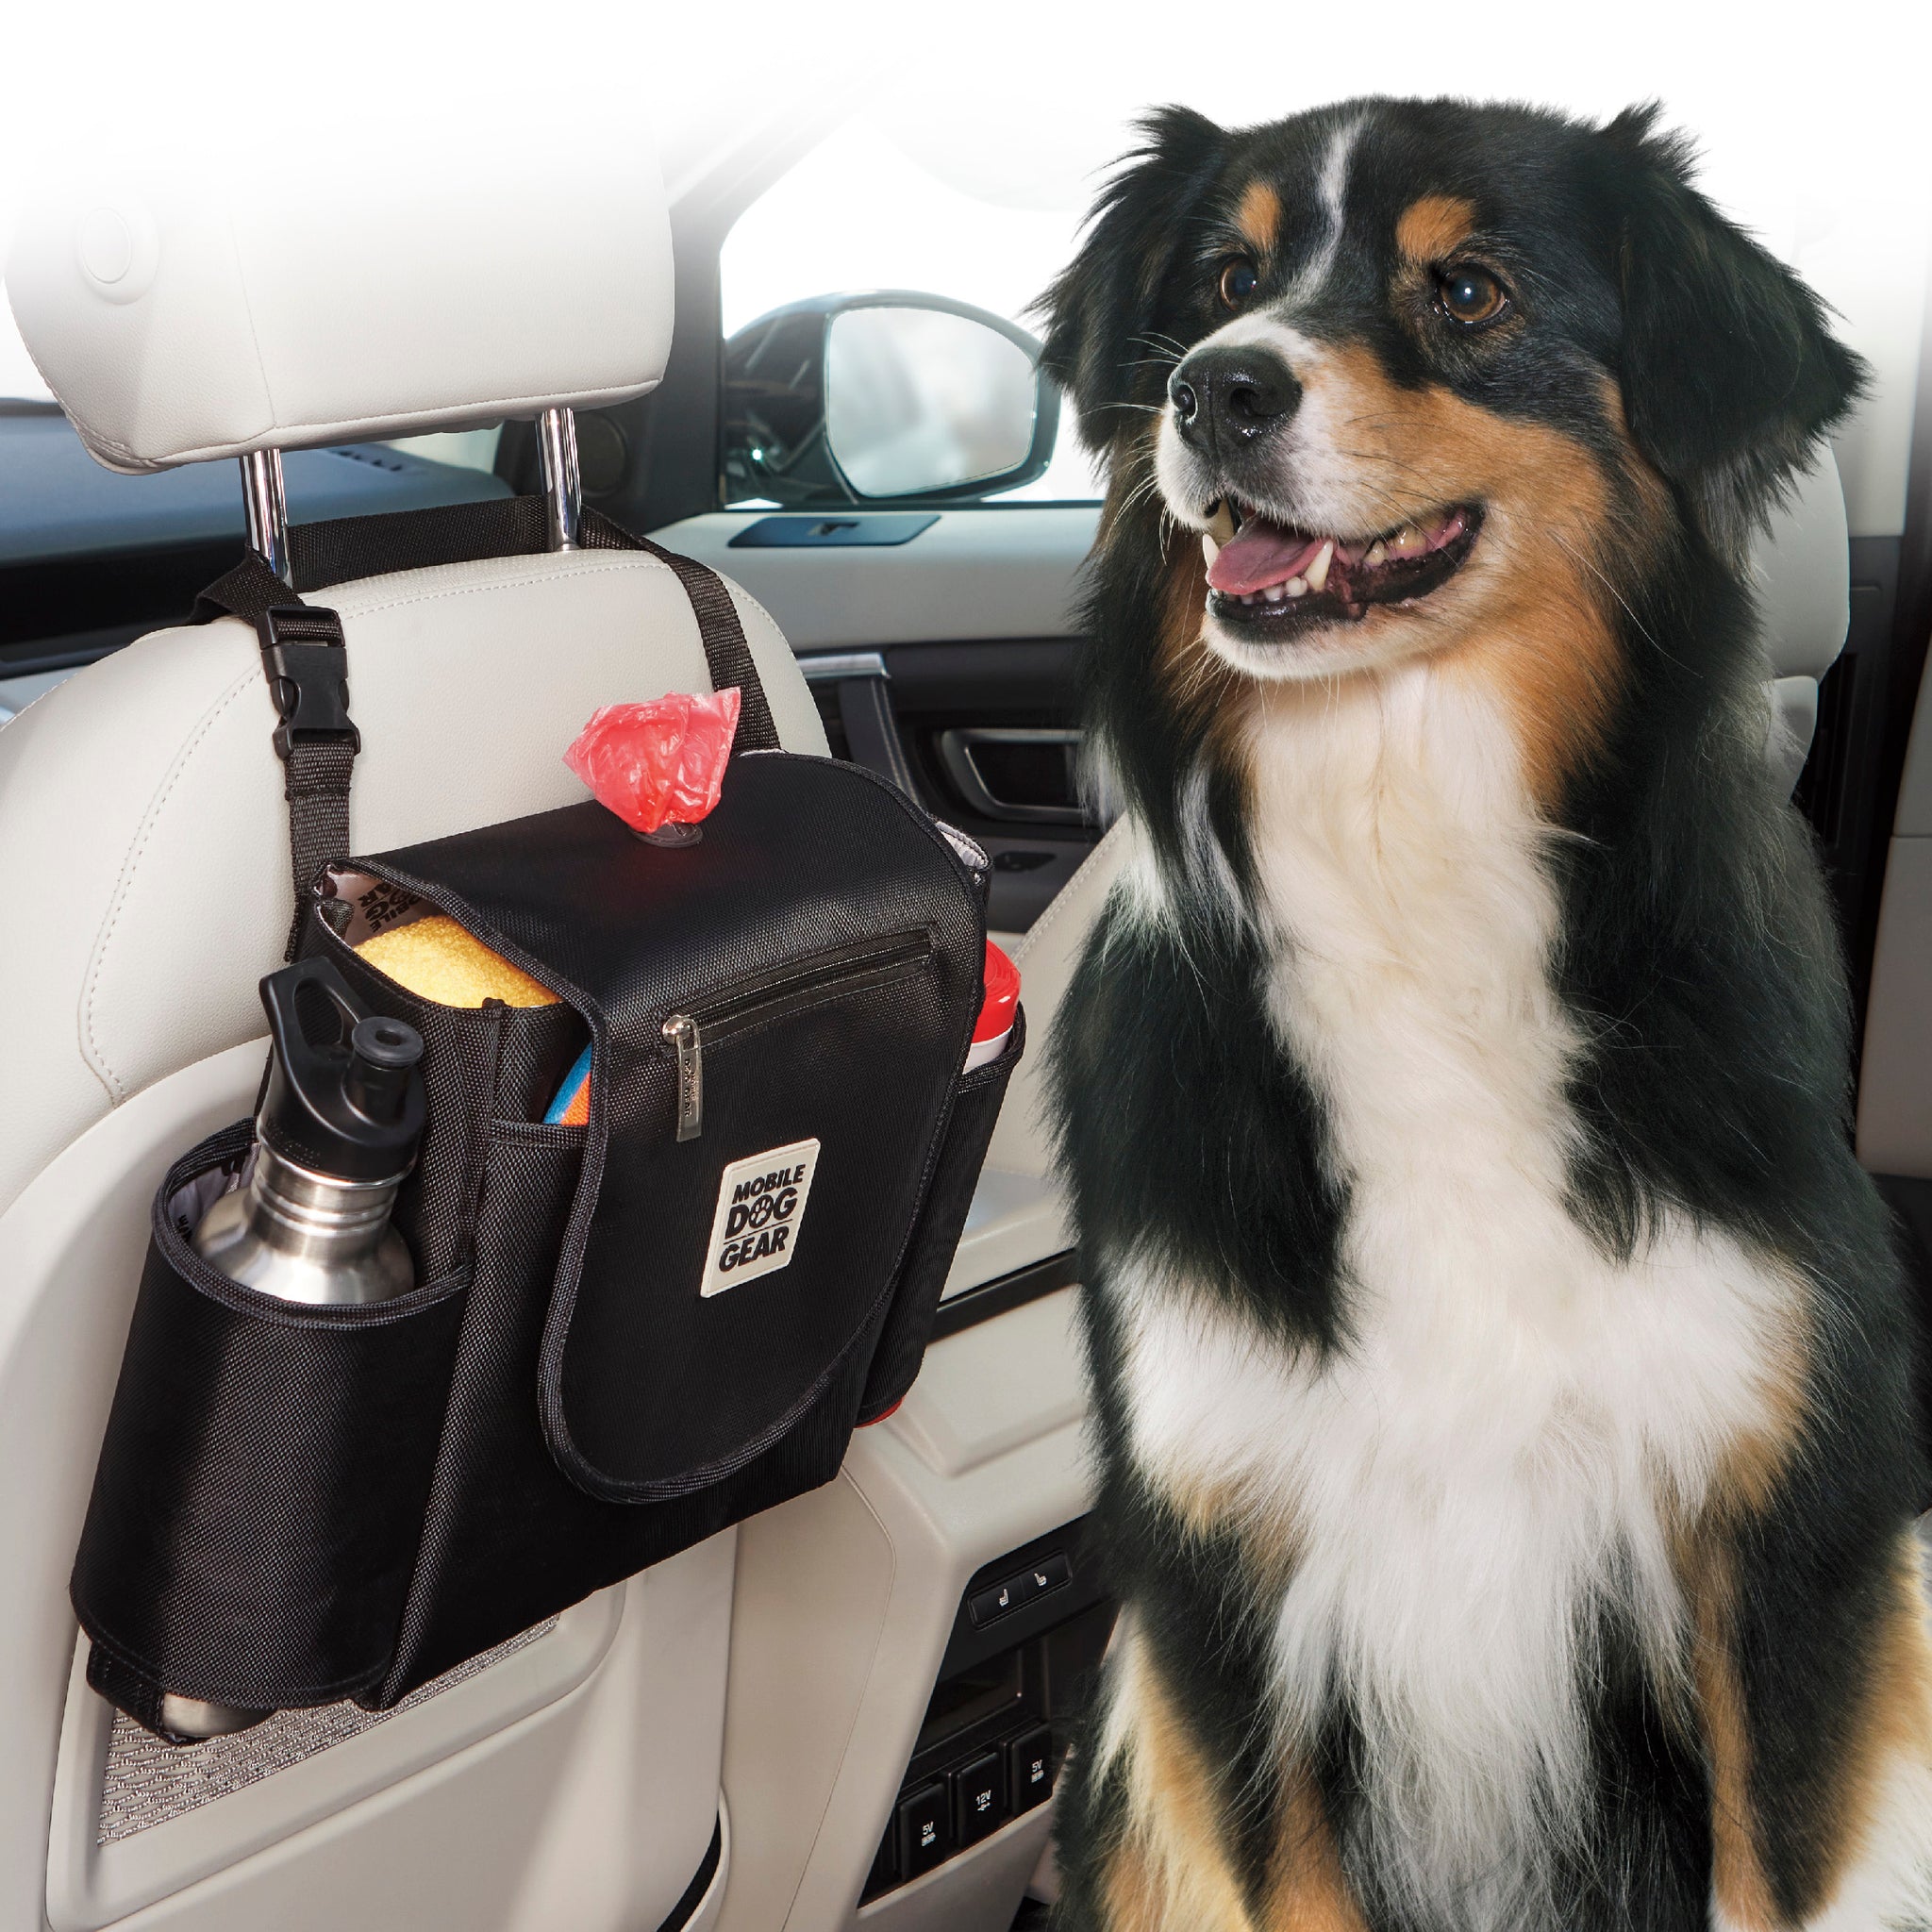 The dog gear car organizer. The strong hook and loop closure attaches on the back of your car seat.